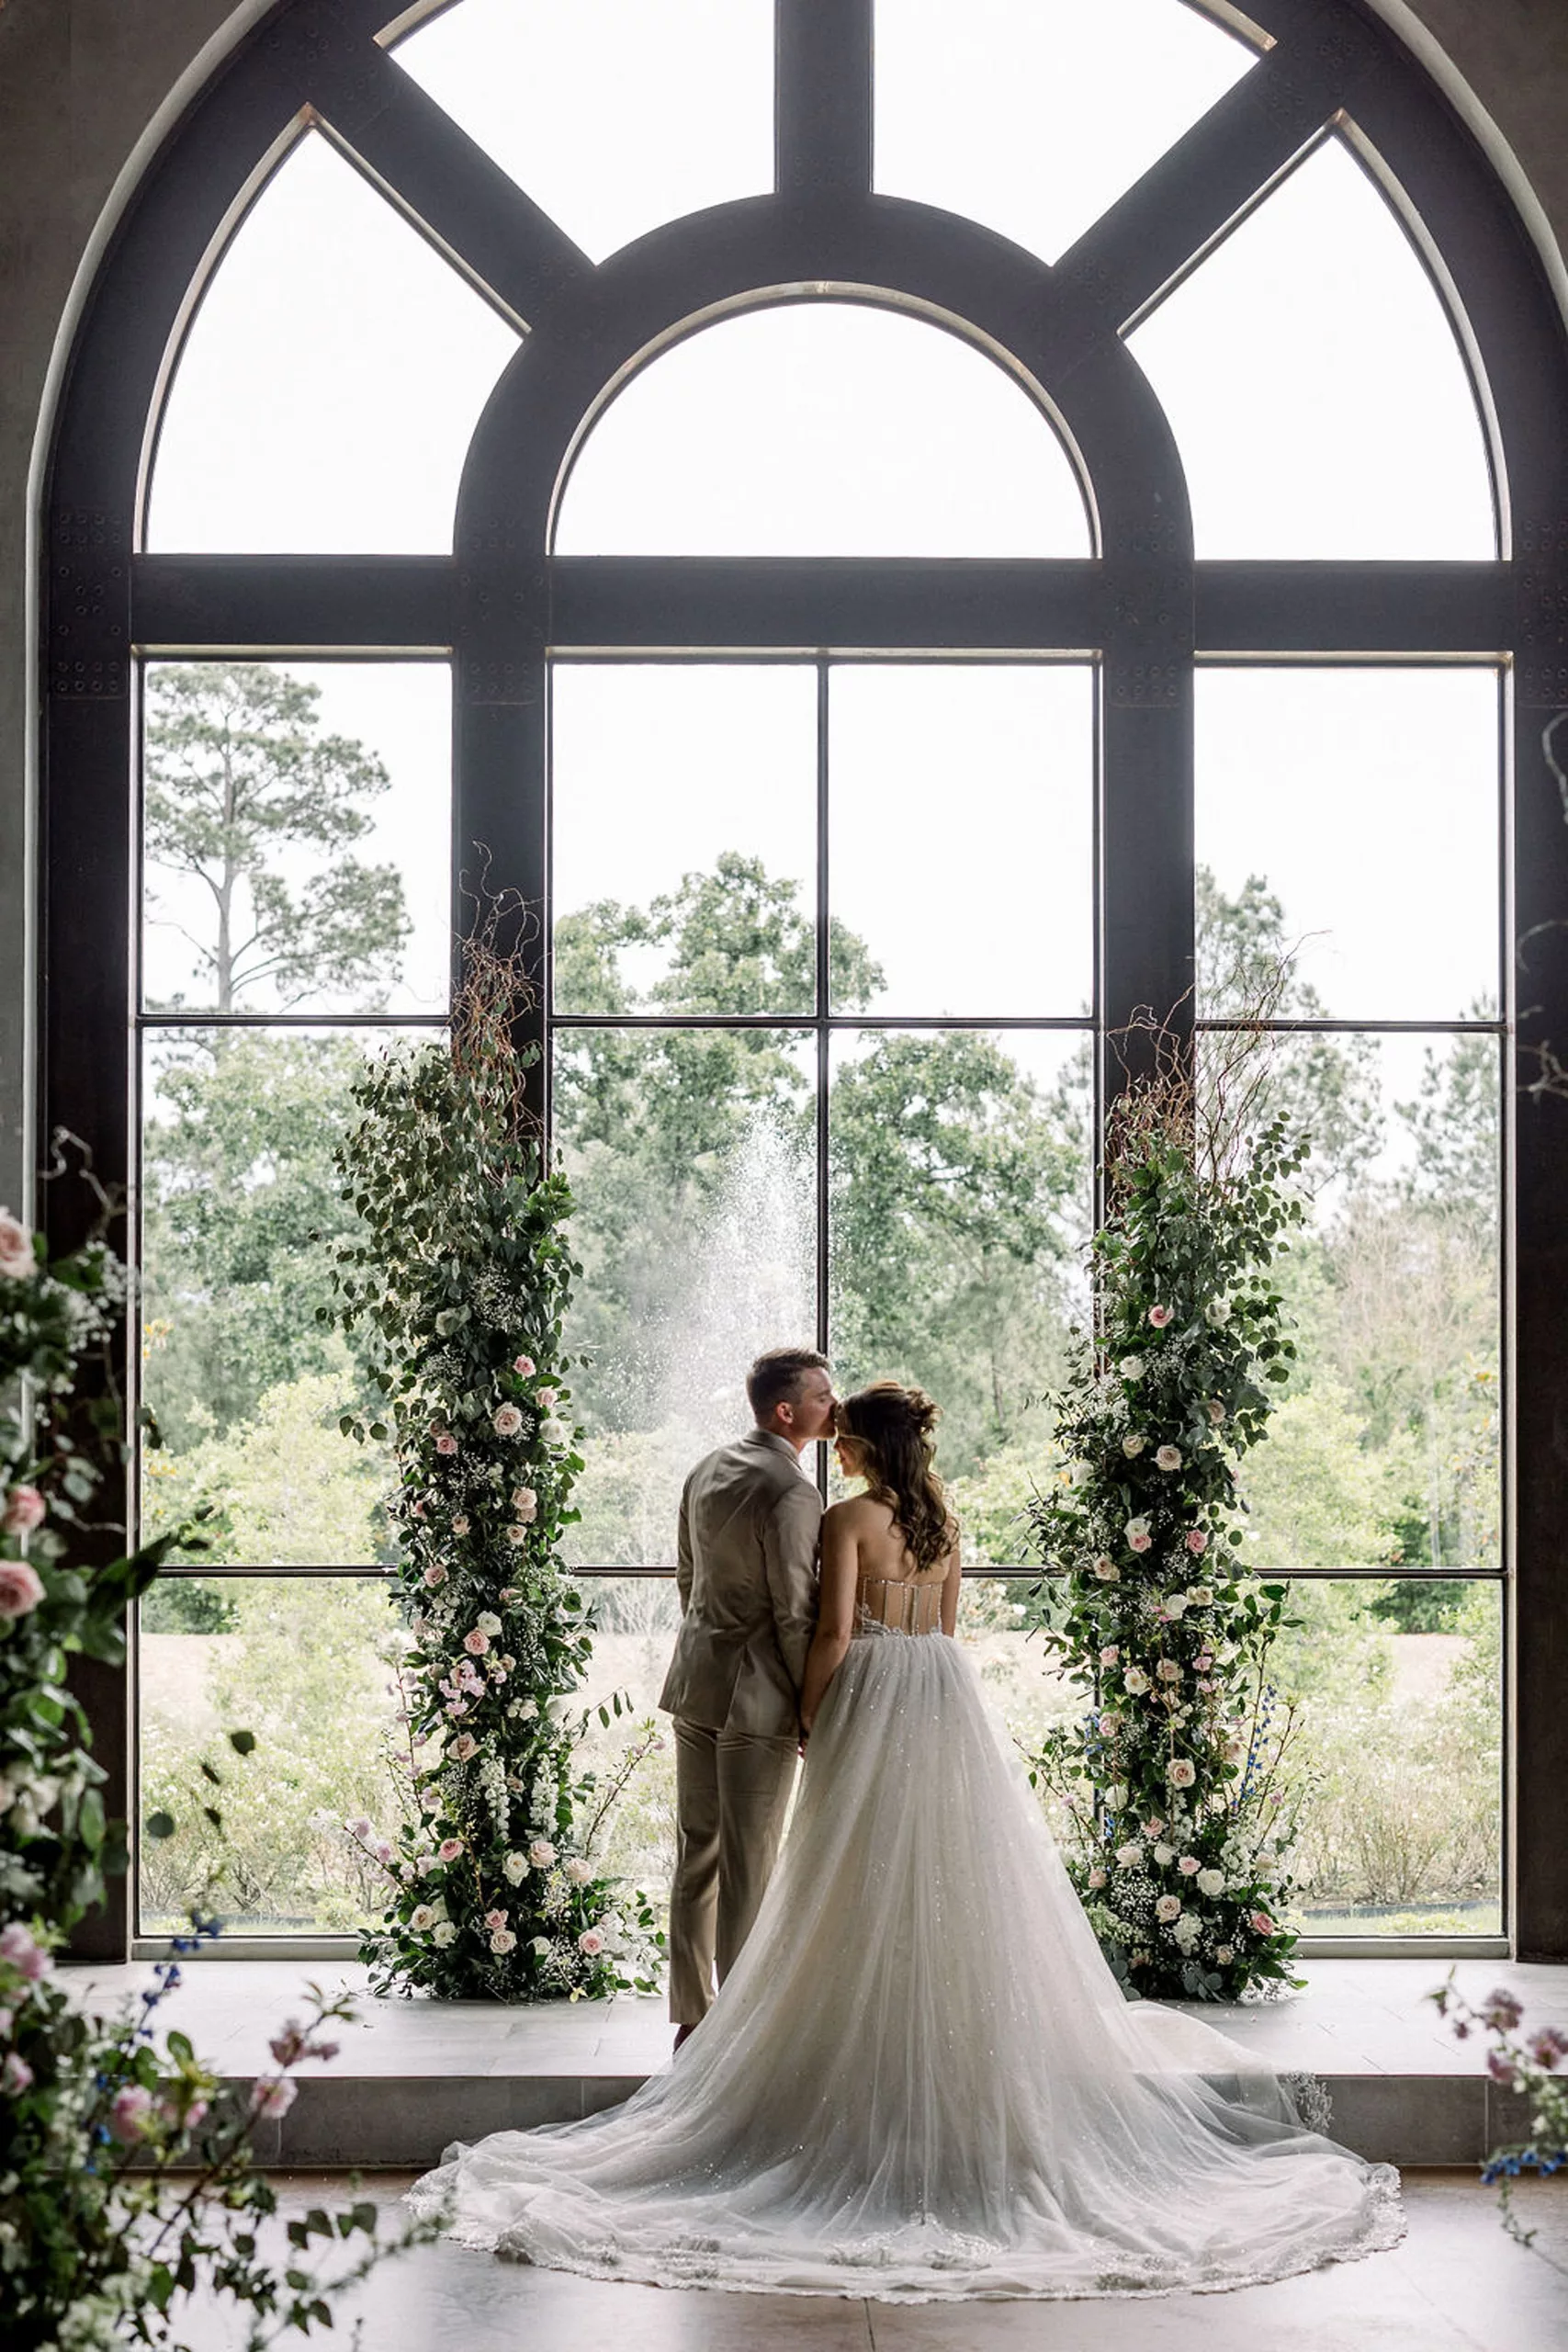 Newlyweds stand in a large window as the groom in a beige suit kisses his bride on the forehead at the iron manor wedding venue